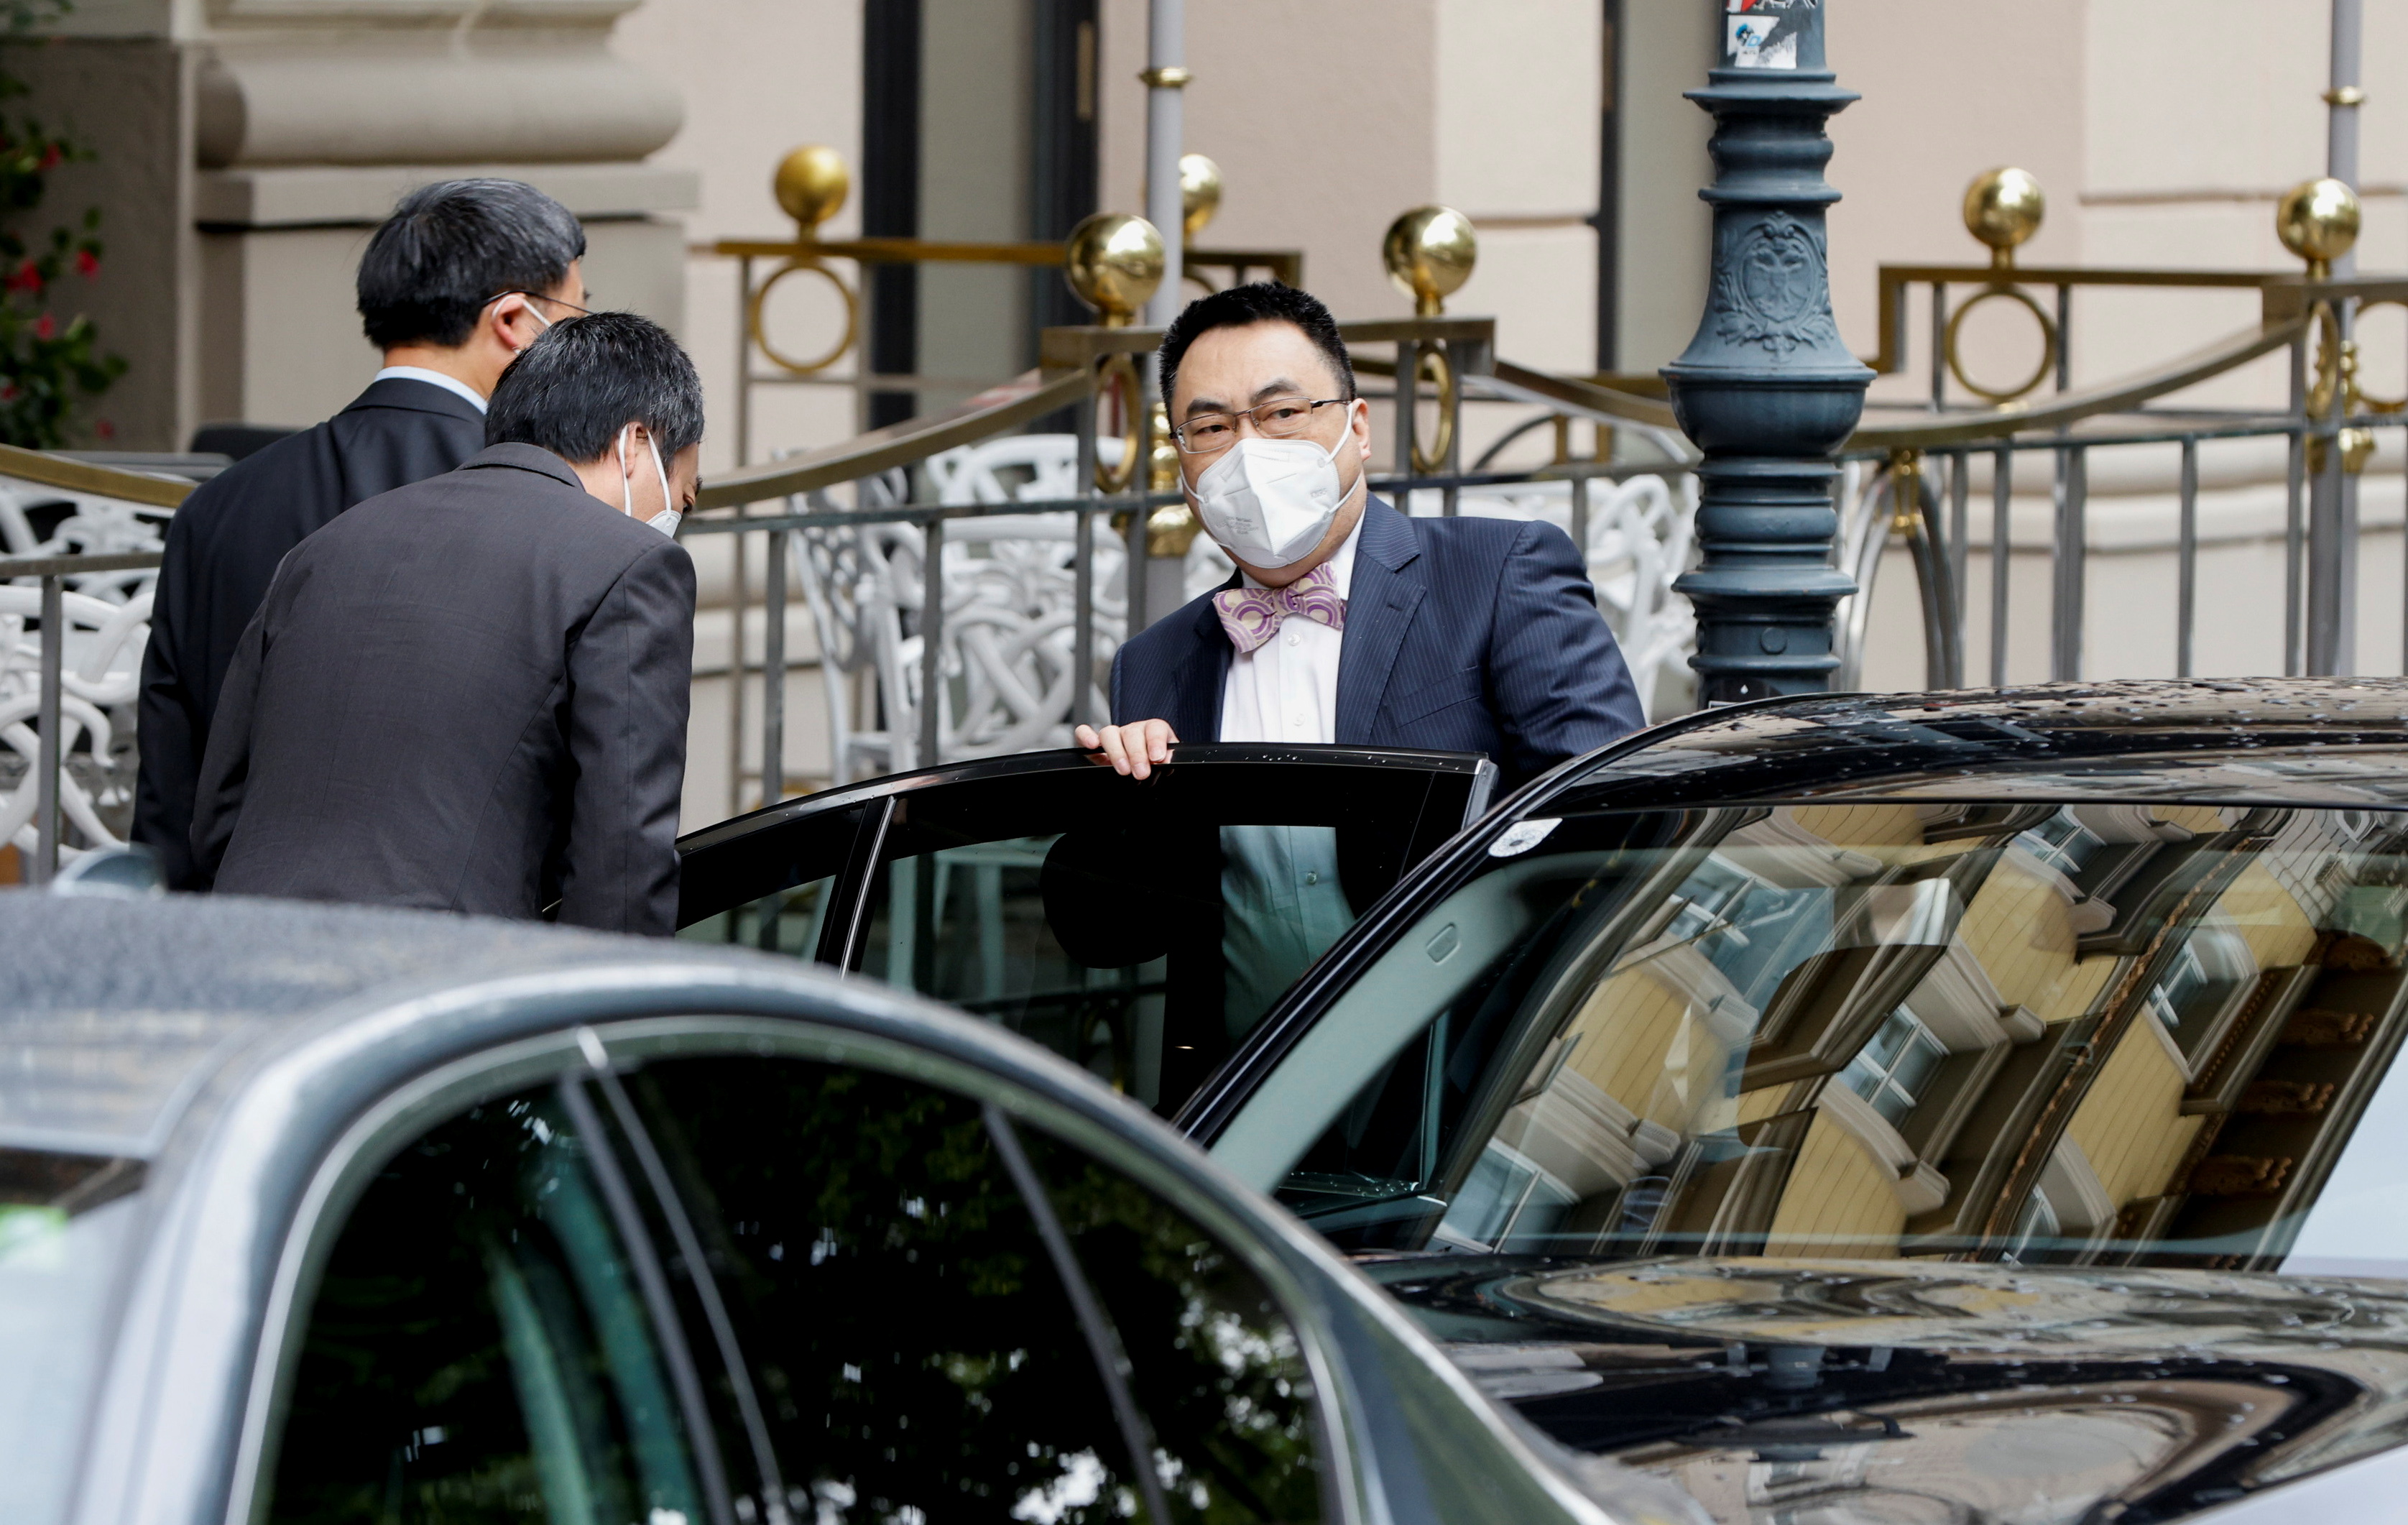 Ambassador of the Permanent Mission of the People's Republic of China to the United Nations Wang Qun leaves after a meeting of the JCPOA Joint Commission, in Vienna, Austria, May 19, 2021. REUTERS/ Leonhard Foeger?